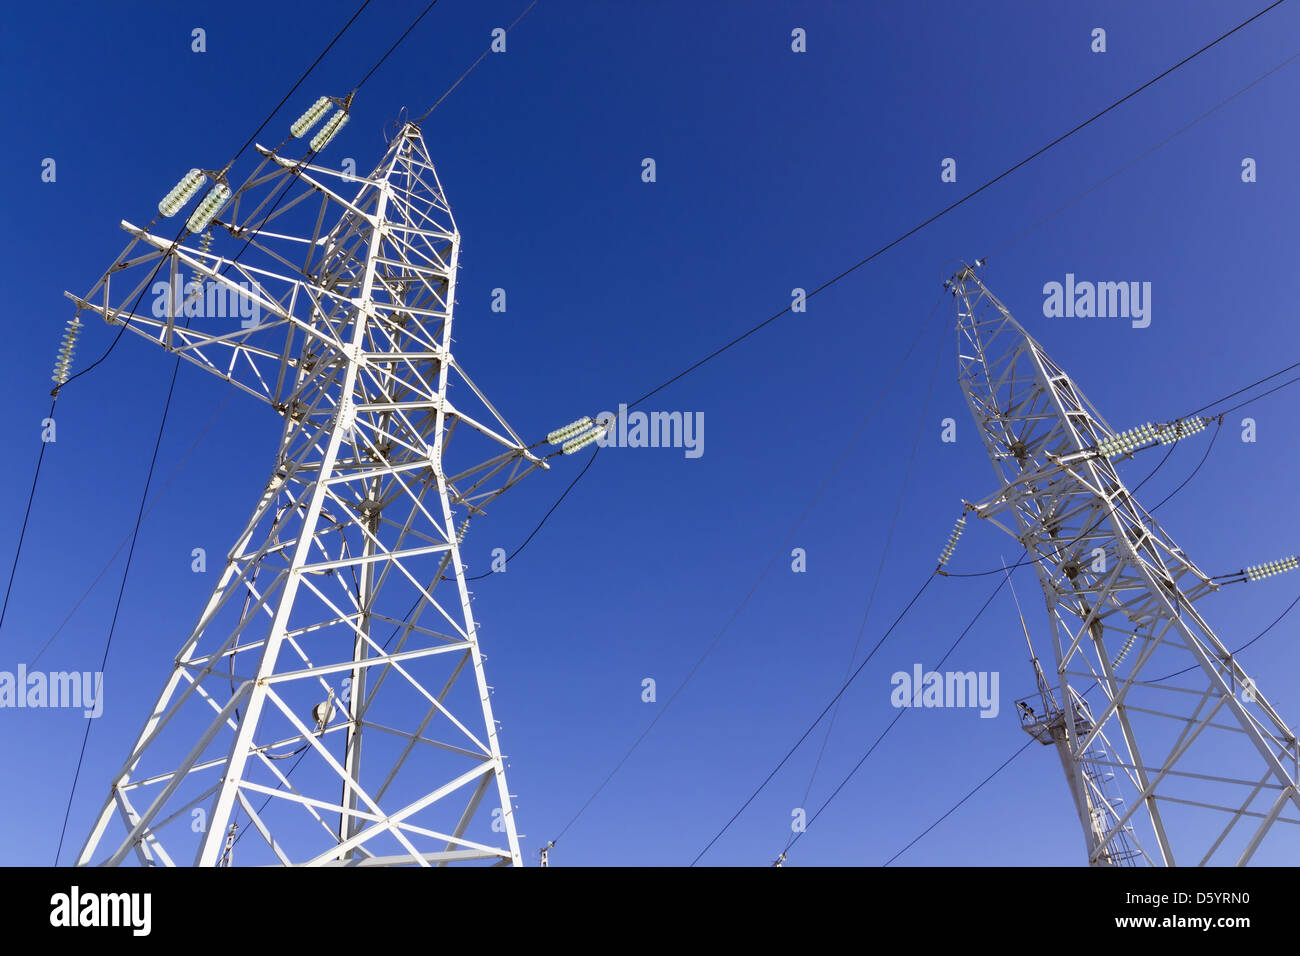 High voltage systems Stock Photo